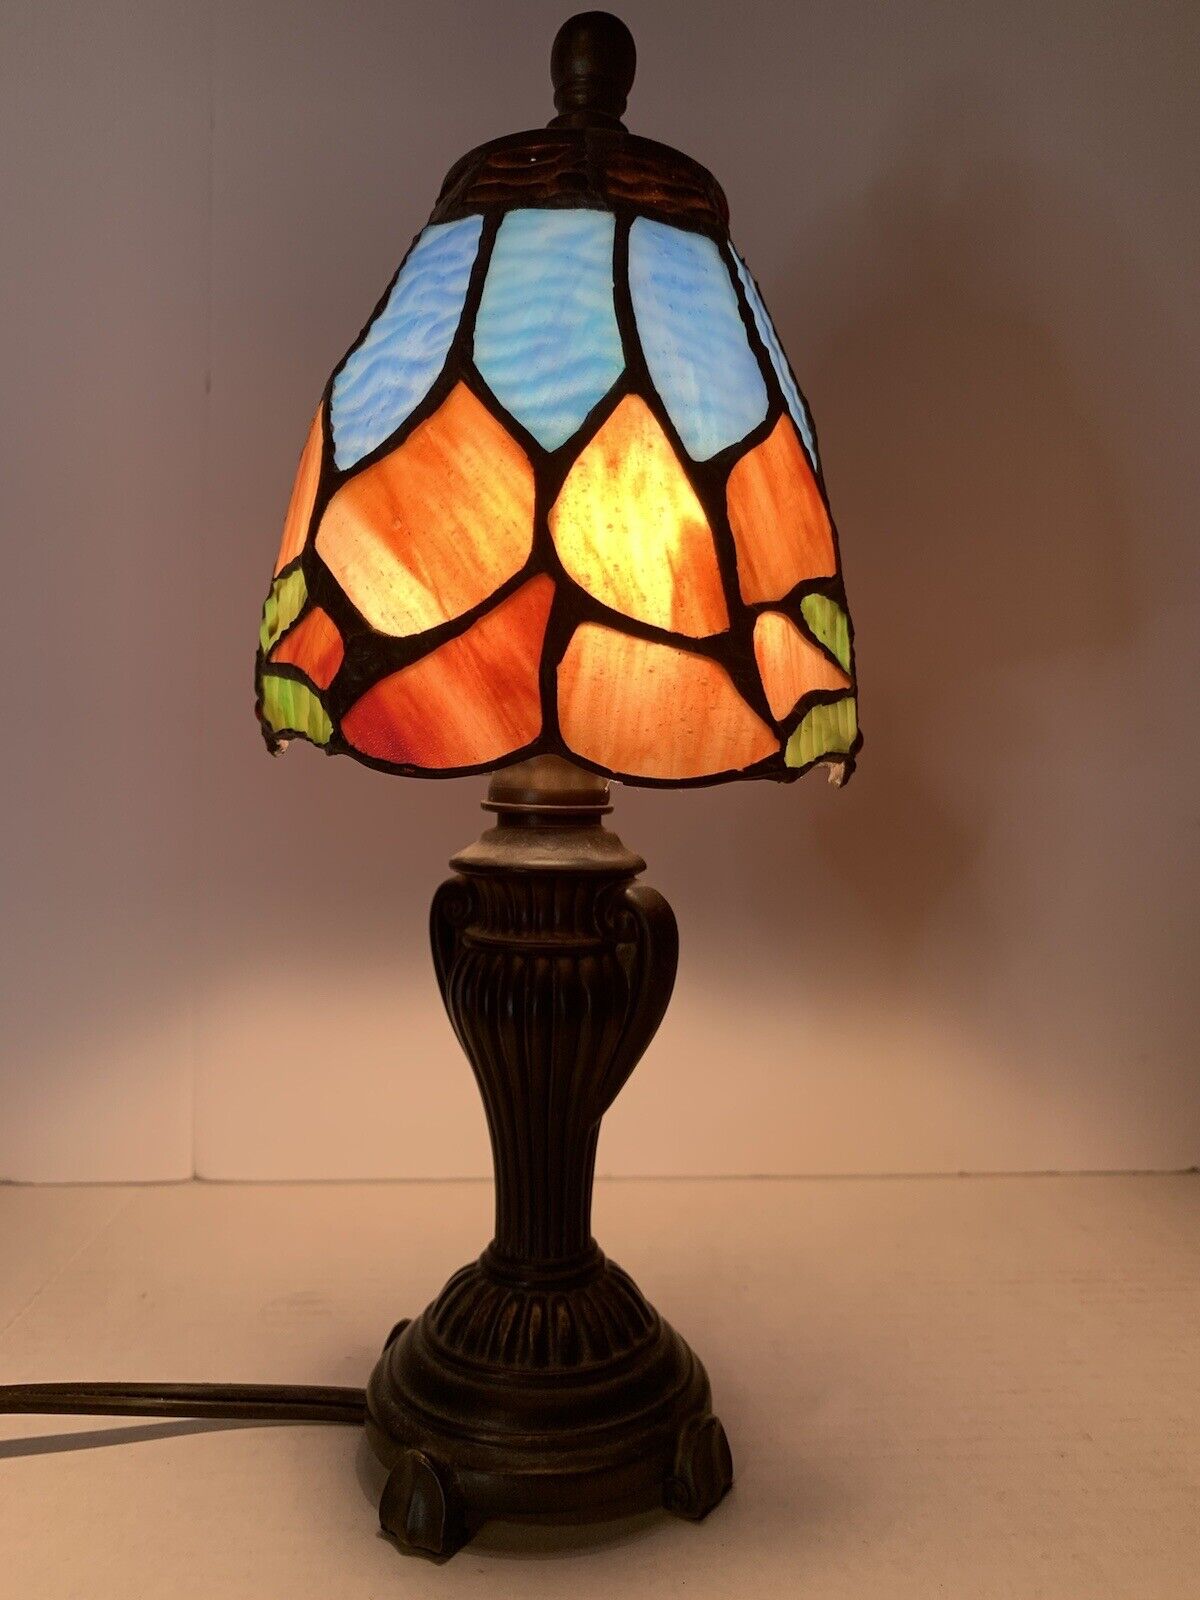 Tiffany Style Table Lamp Stained Glass 12” LAMP AND SHADE